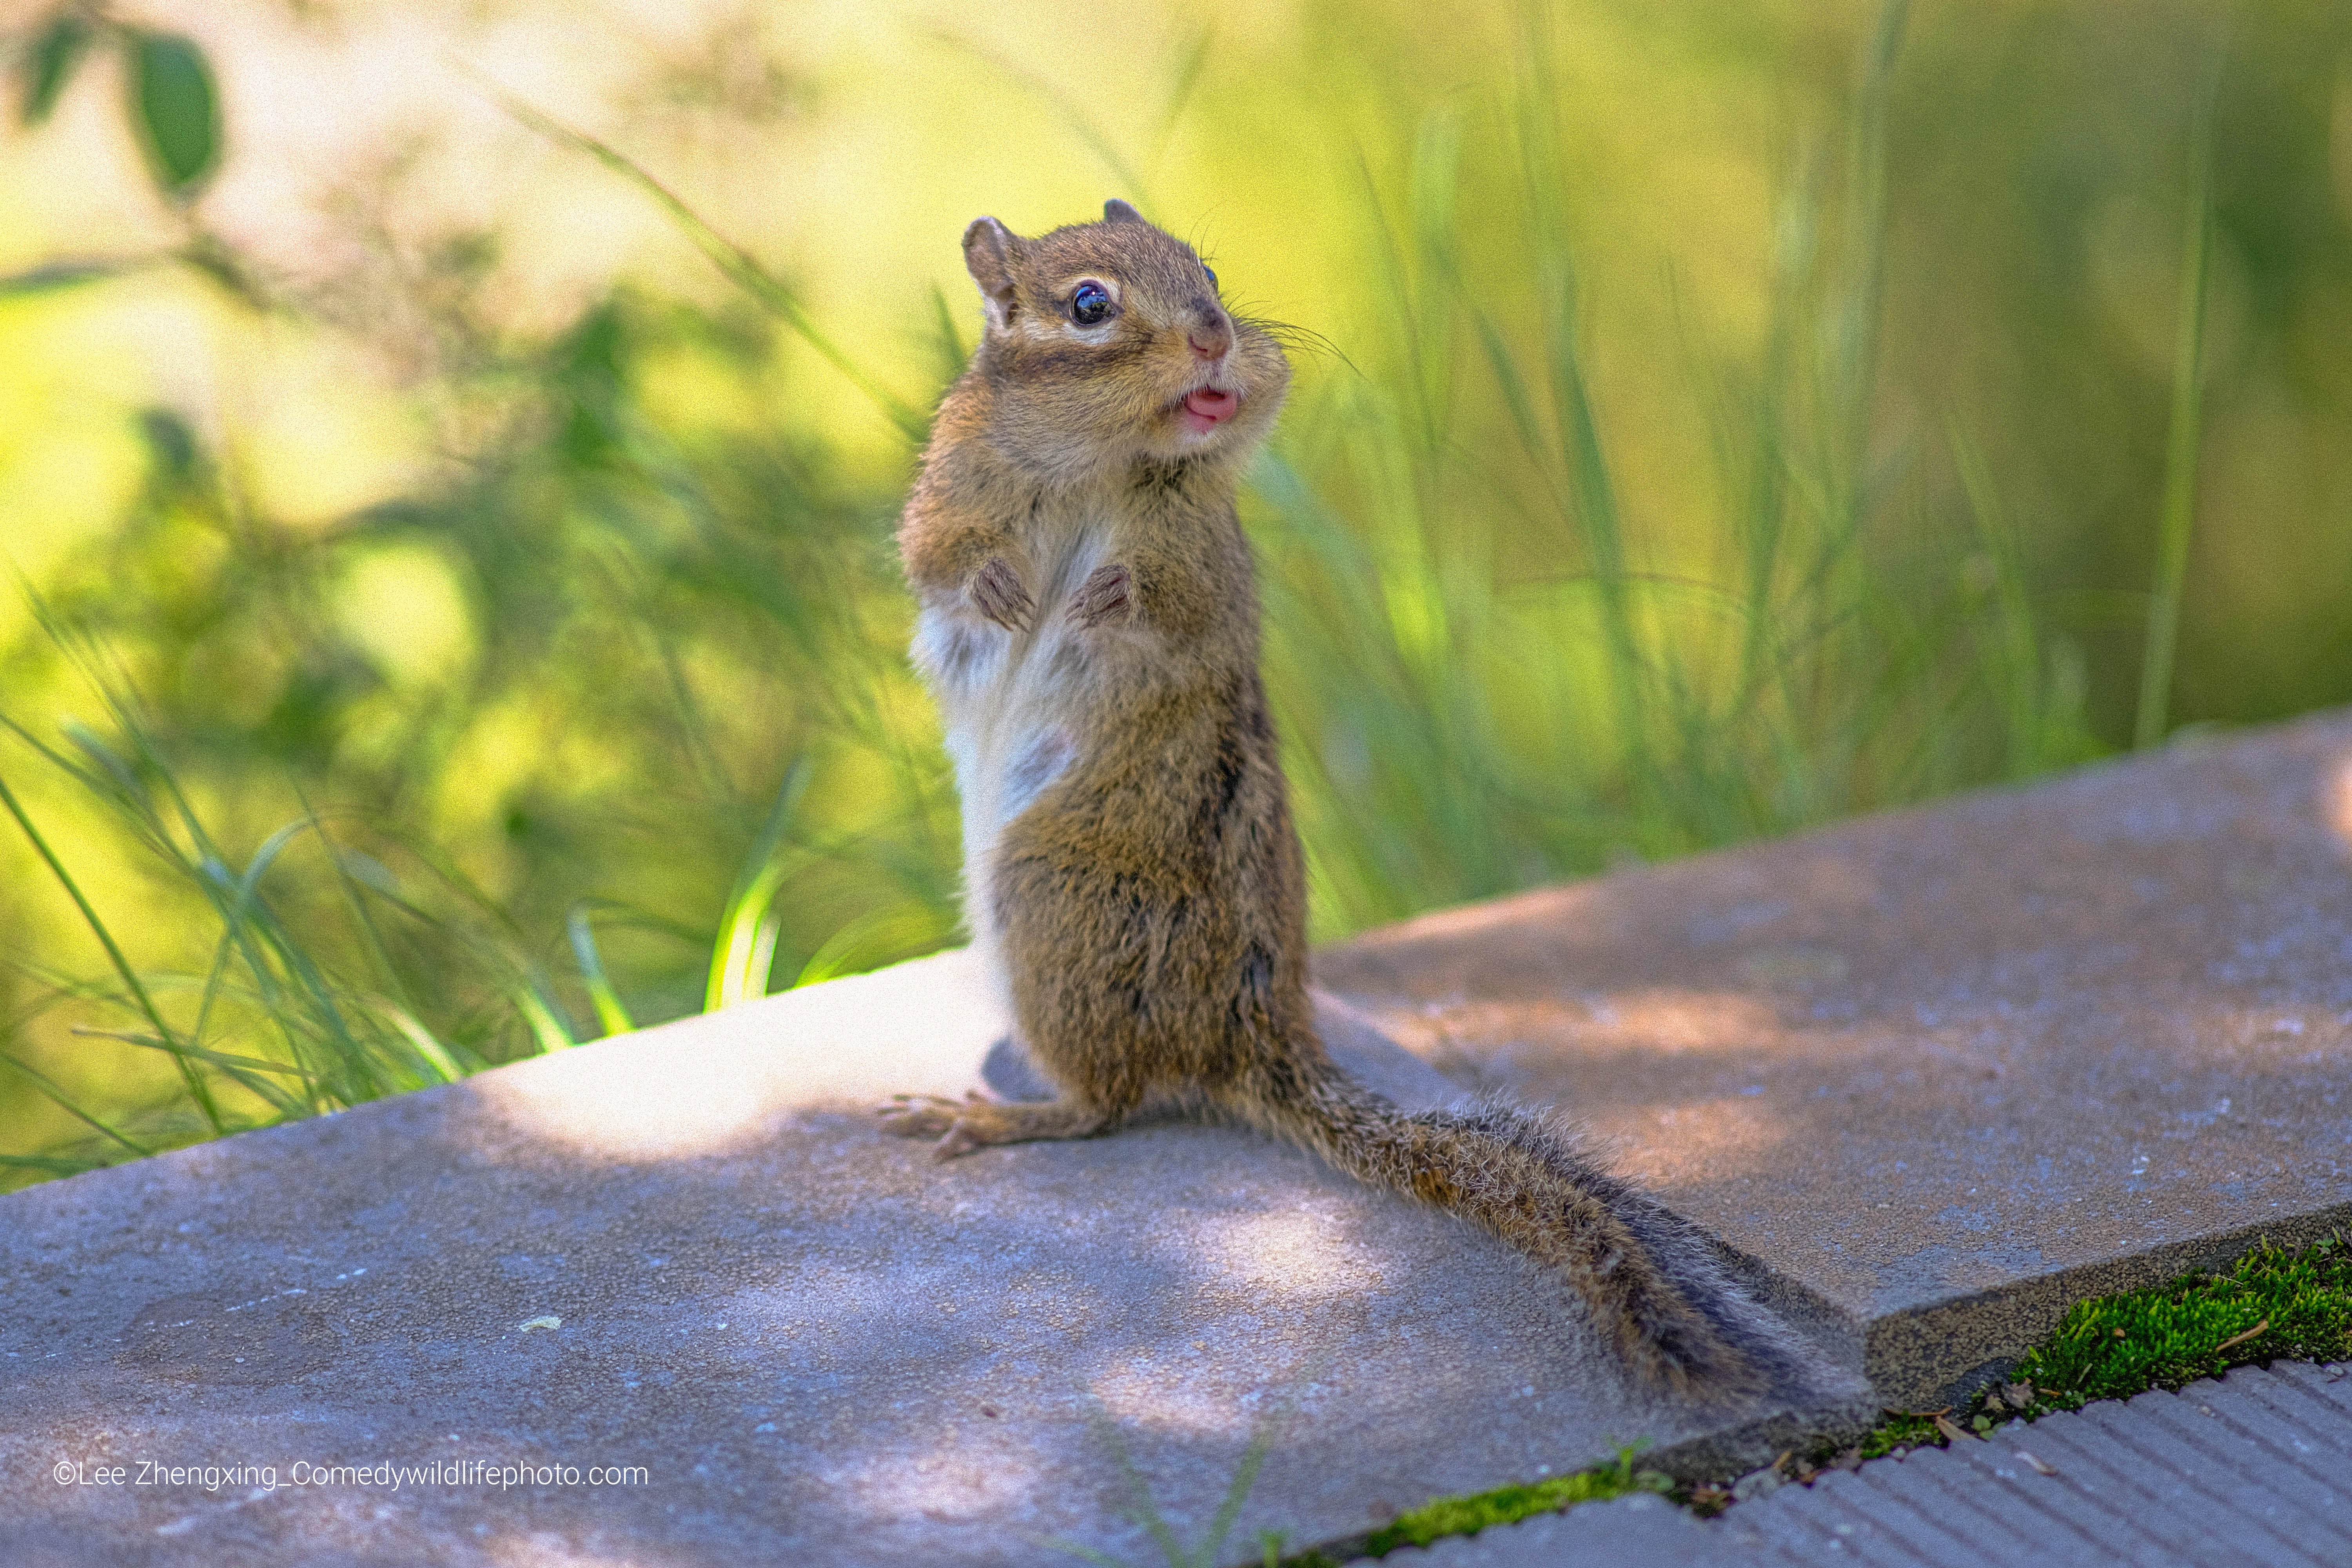 A squirrel dramatically looks back towards the photographer. (Photo: © Lee Zhengxing / Comedywildlifephoto.com.)